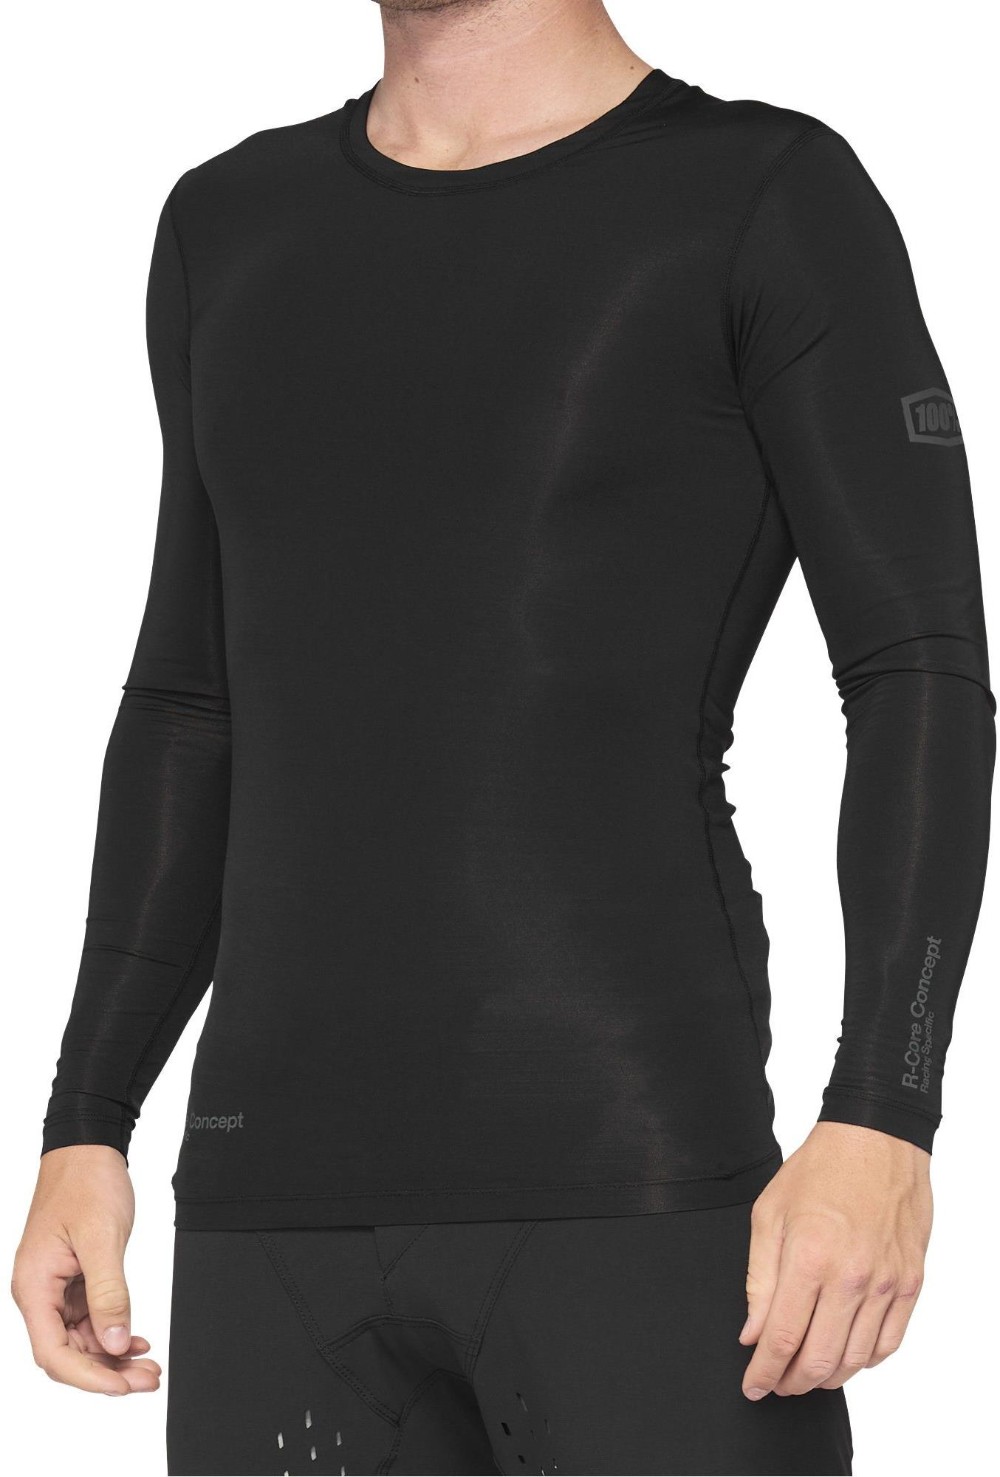 R-Core Concept Long Sleeve MTB Cycling Jersey image 0